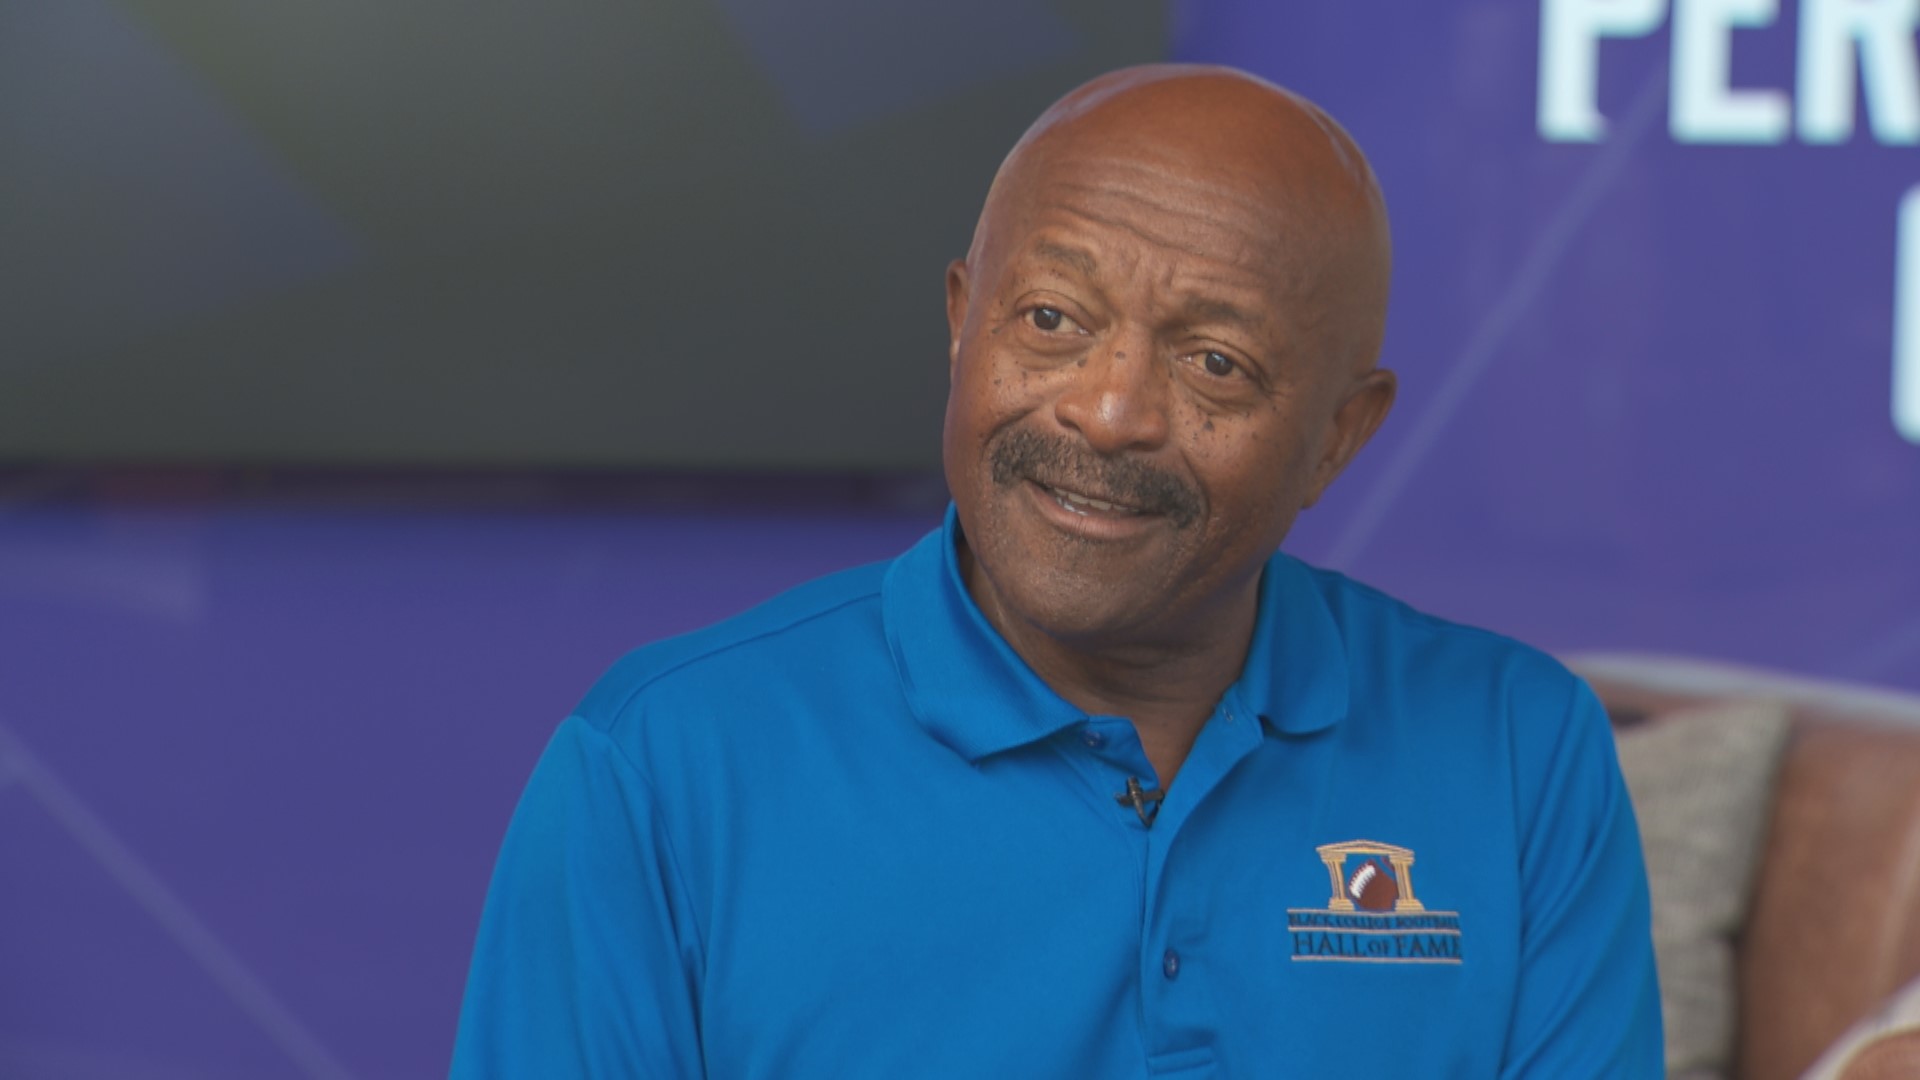 Greg Coleman retired from the Vikings after 44 years with the organization, and he is just as busy with life after football.